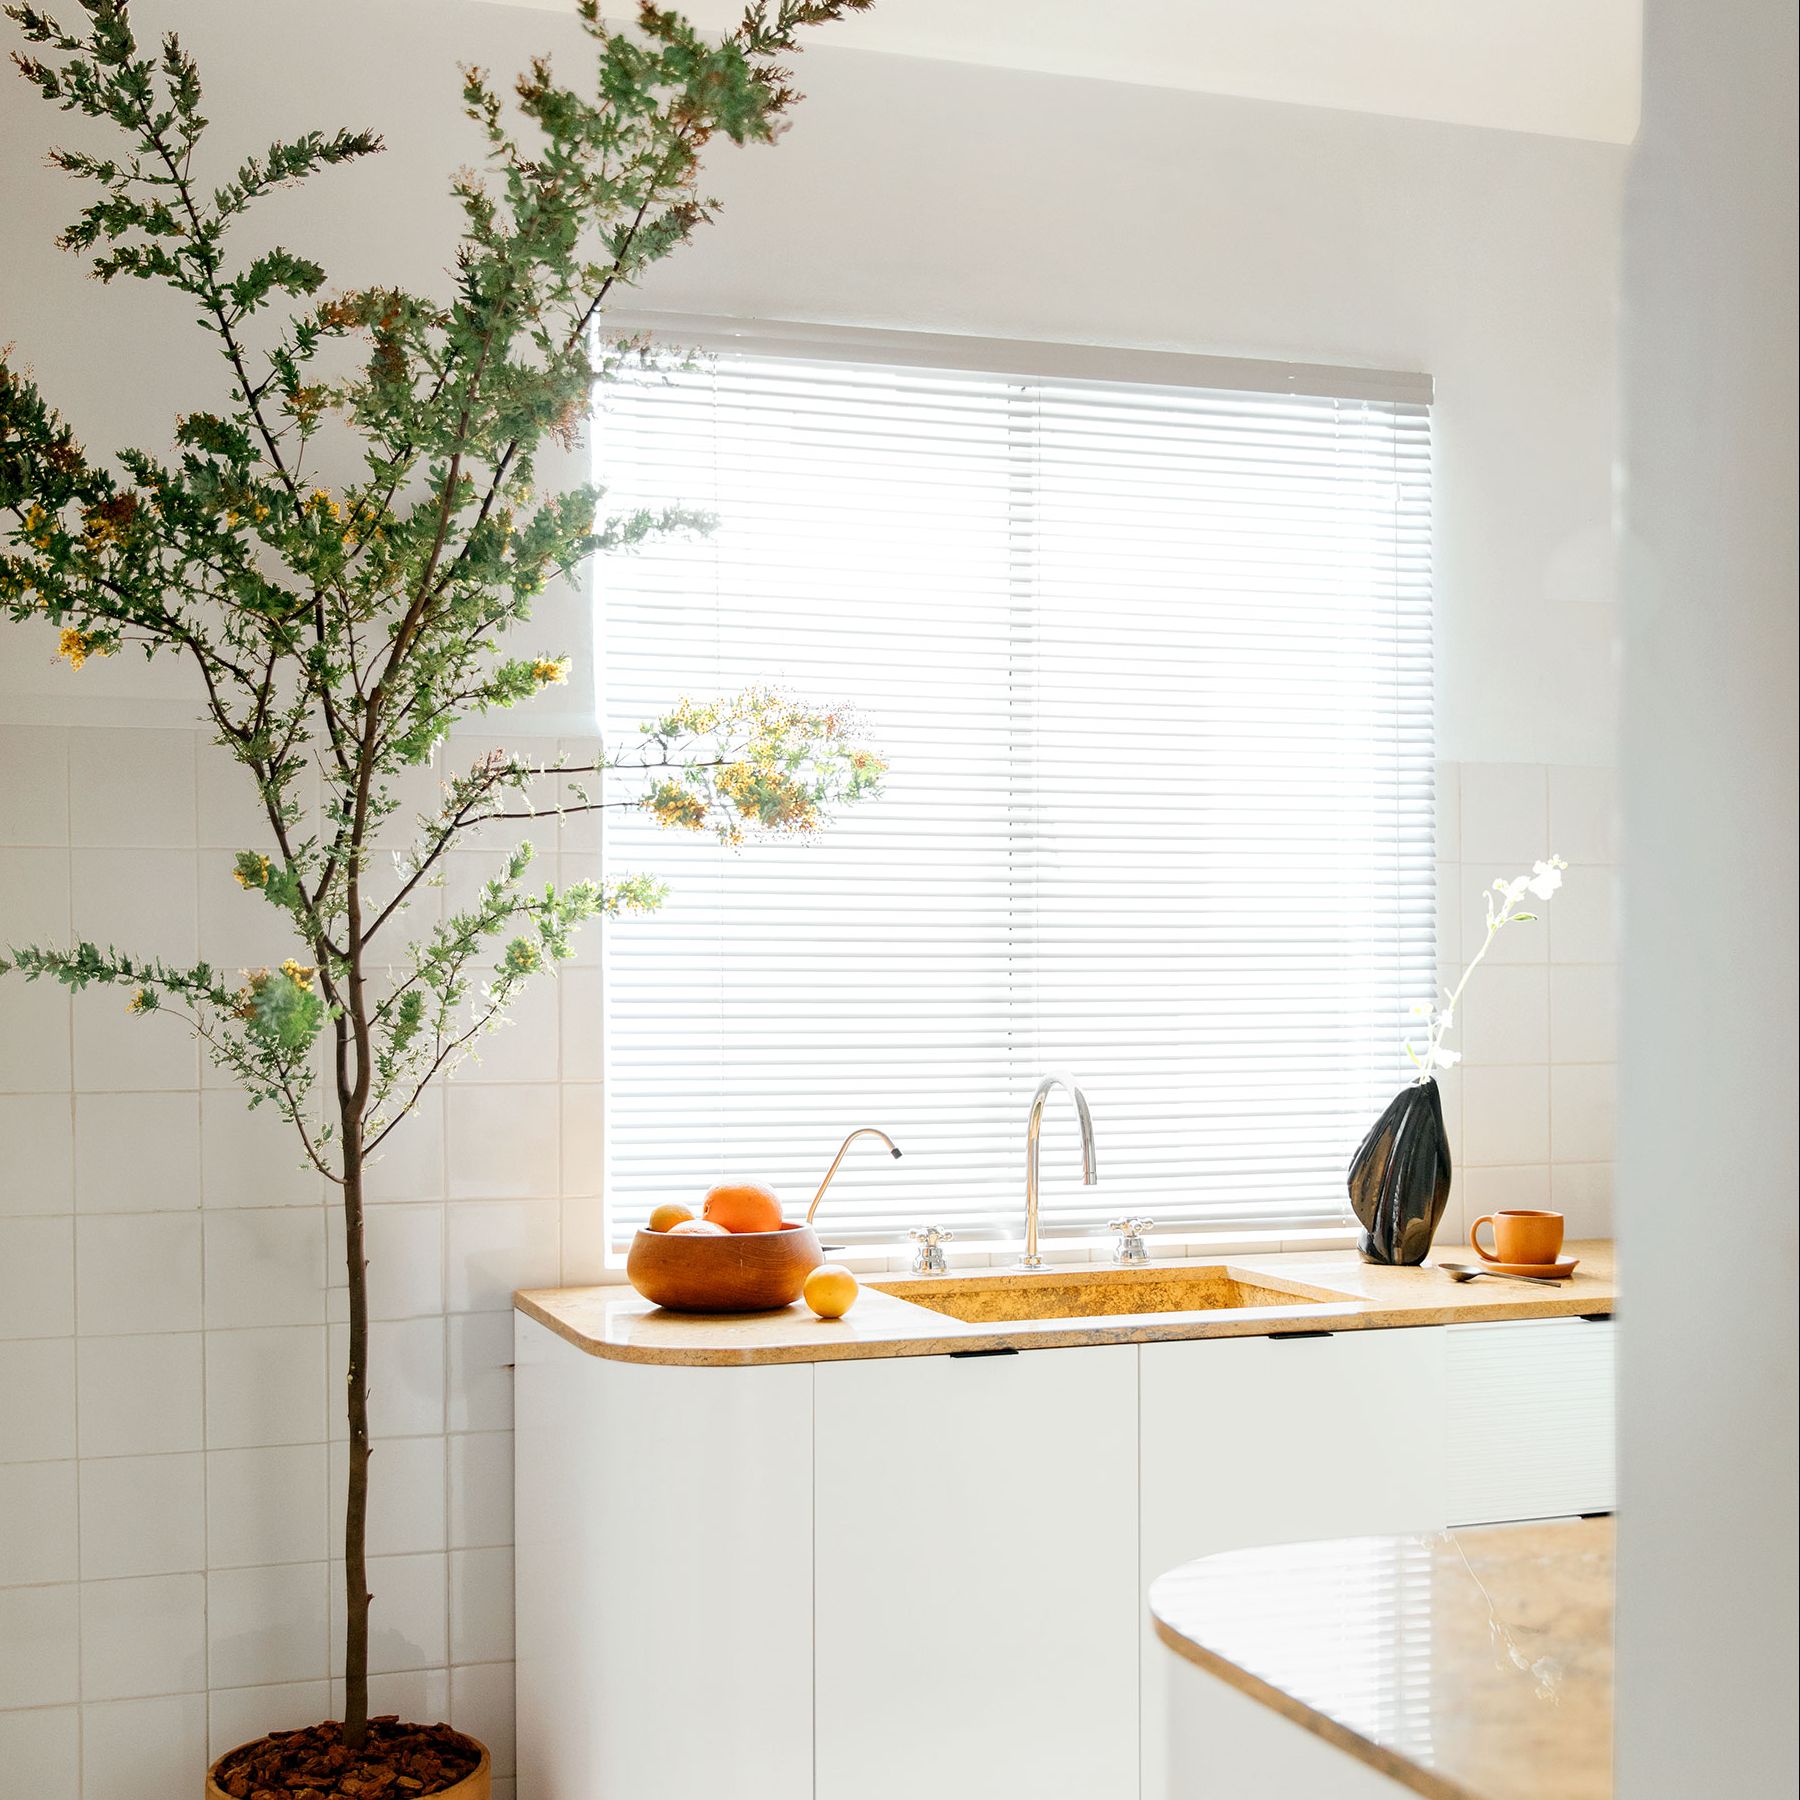 65+ Small (But Mighty) Kitchens to Steal Inspiration From